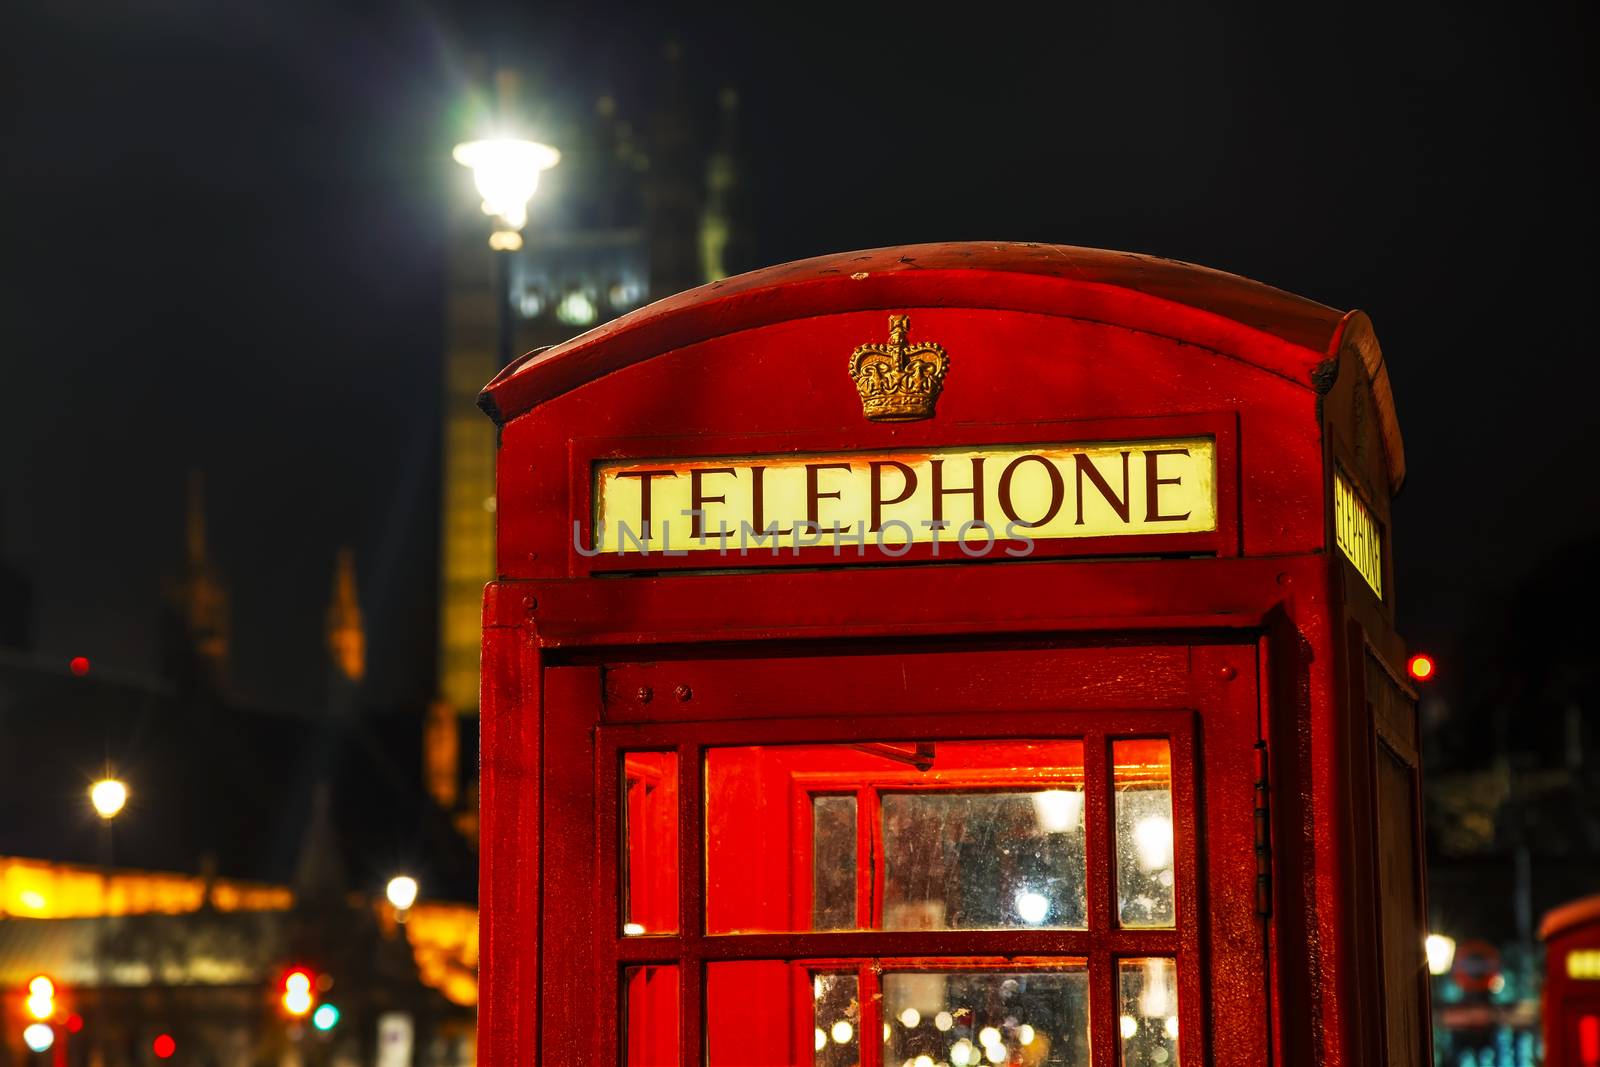 Famous red telephone booth in London, UK at night